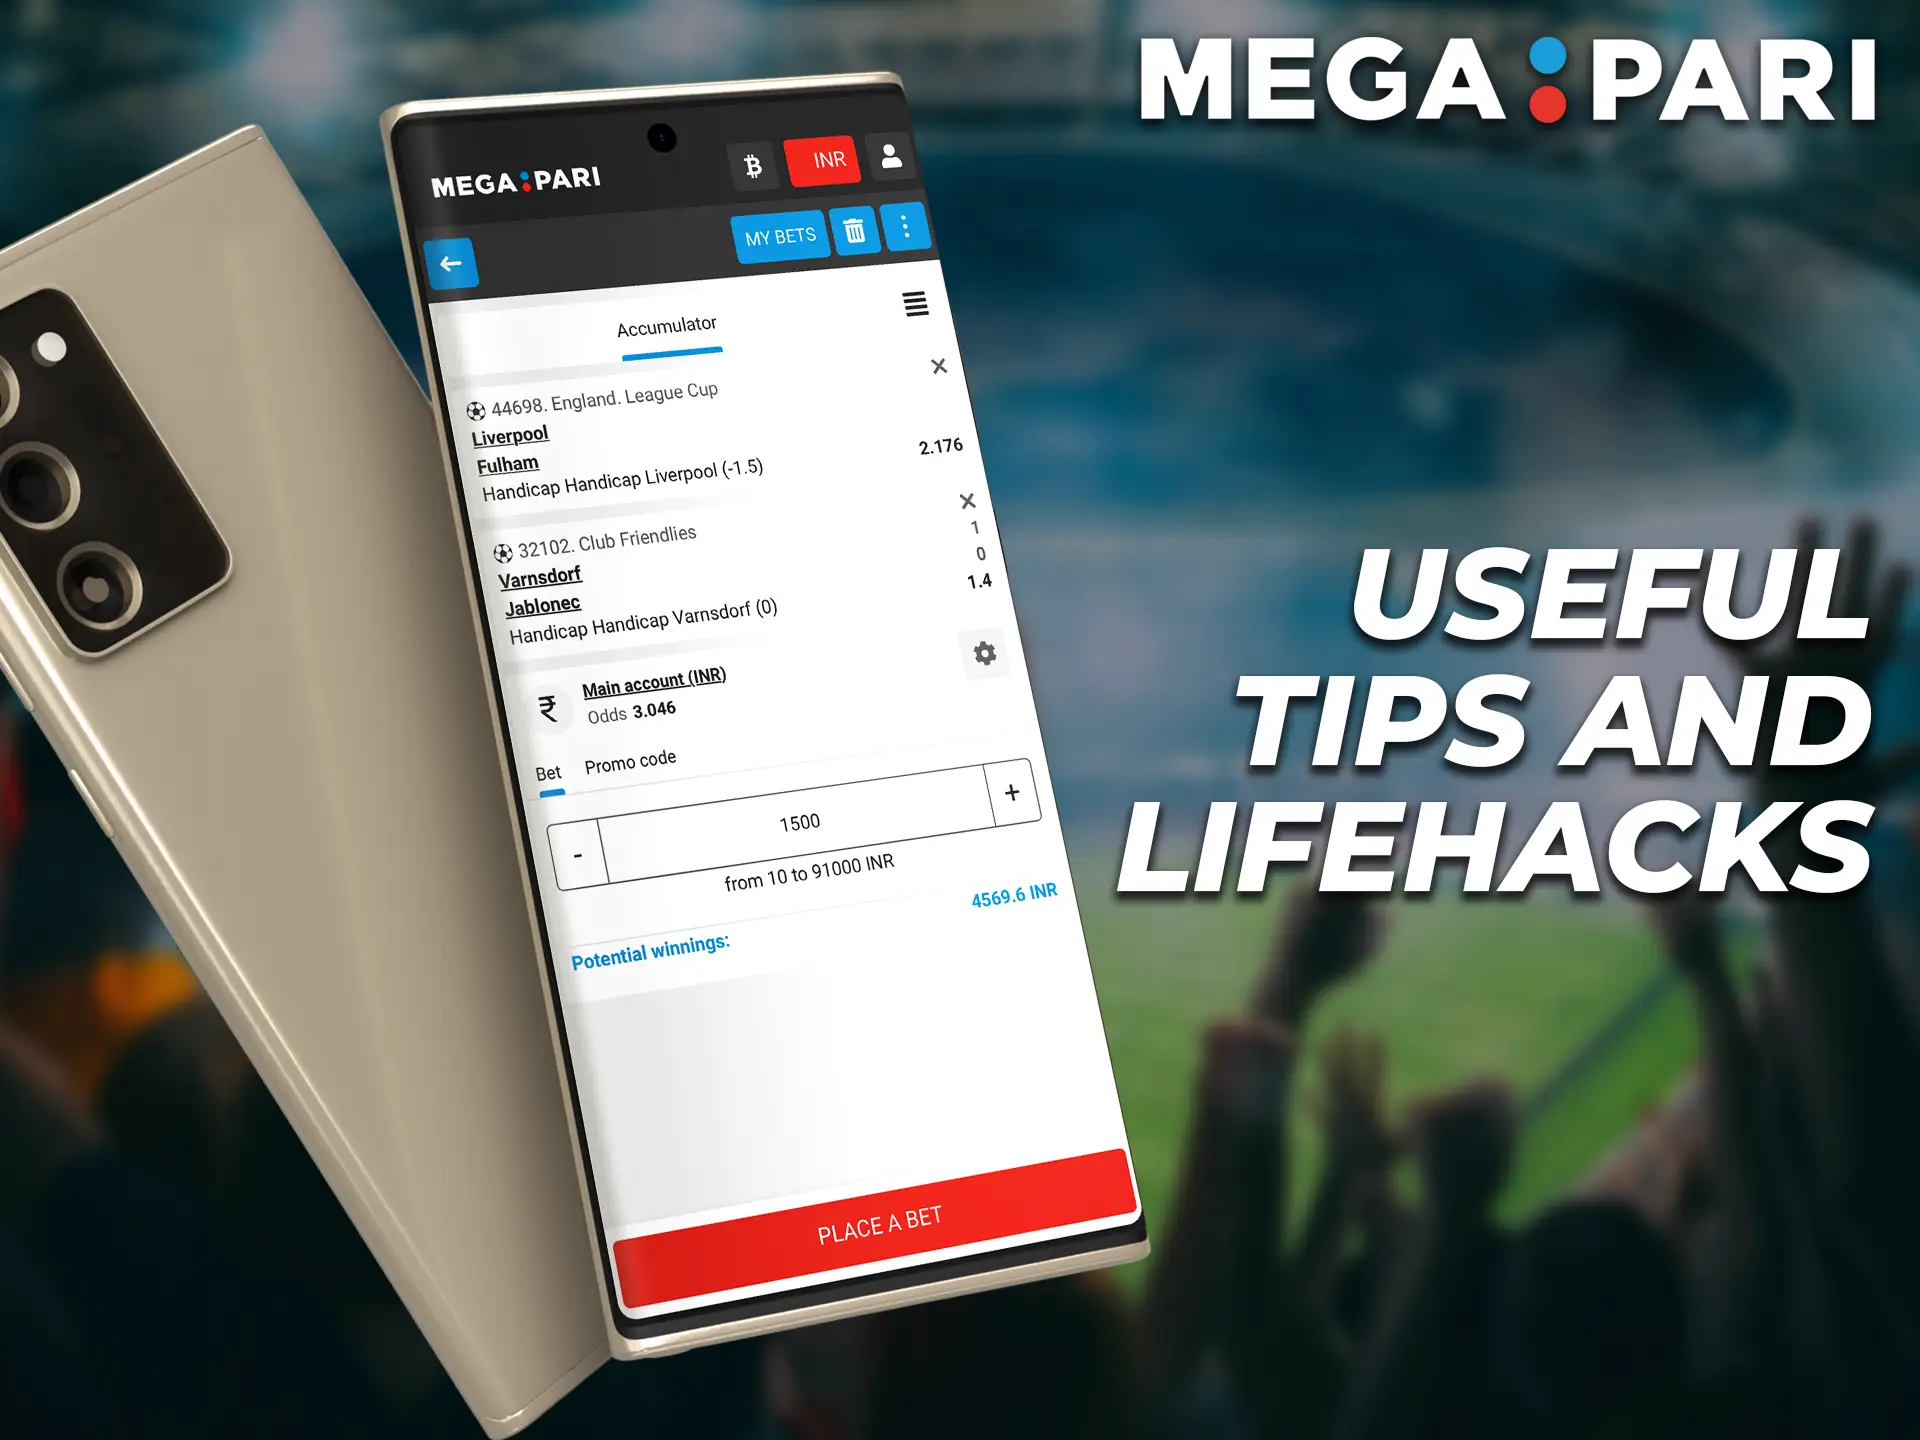 To increase your winnings follow certain tips and tactics.